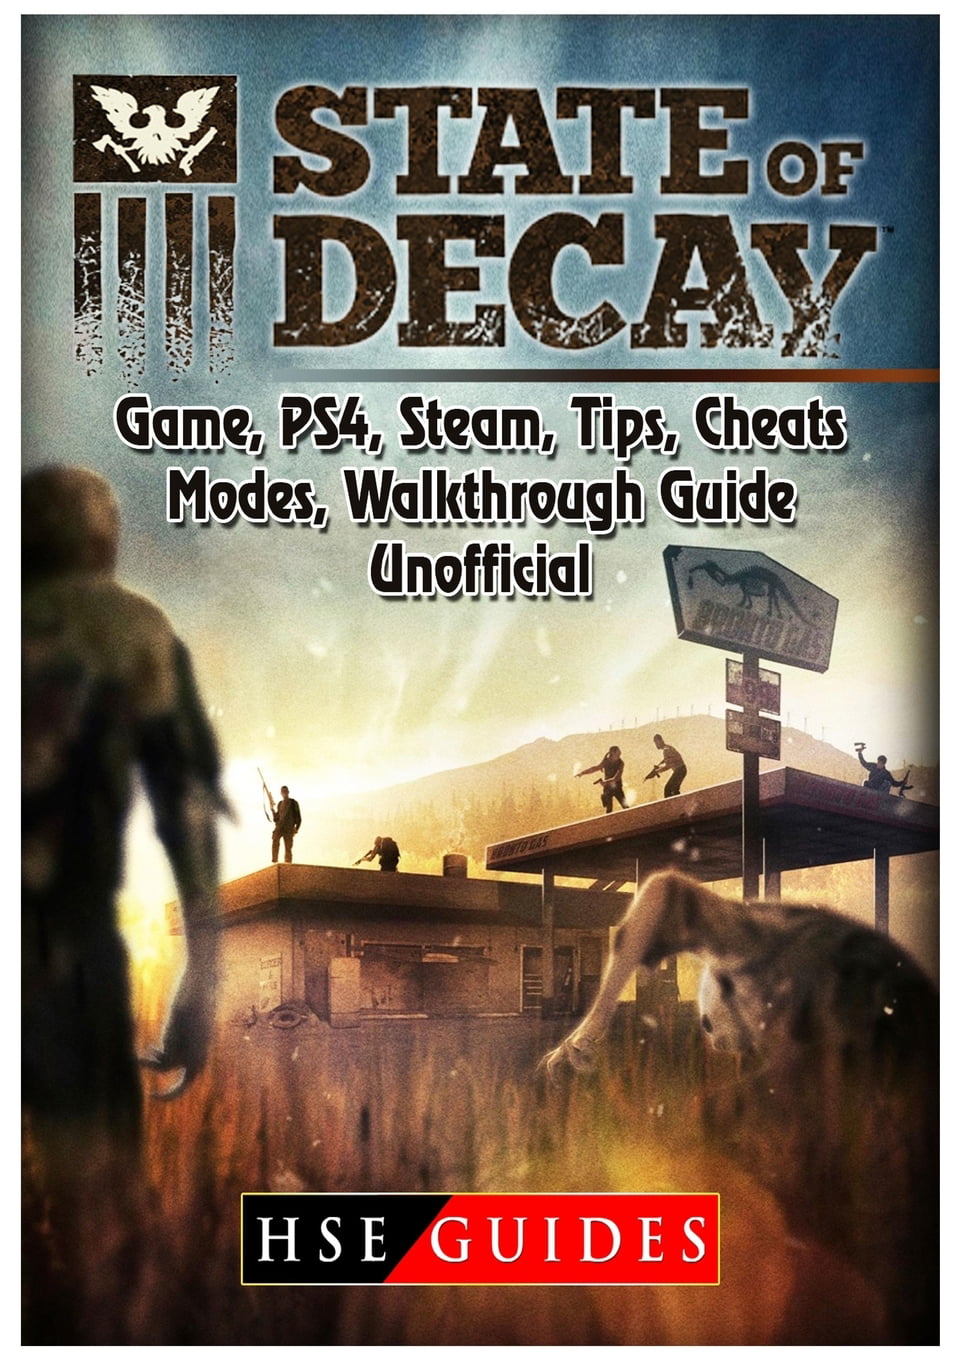 State of Decay 2, Steam, PC, PS4, Multiplayer, Gameplay, Tips, Maps,  Achievements, Bases, Armory, Addons, Weapons, Skills, Guide Unofficial  eBook by Chala Dar - EPUB Book